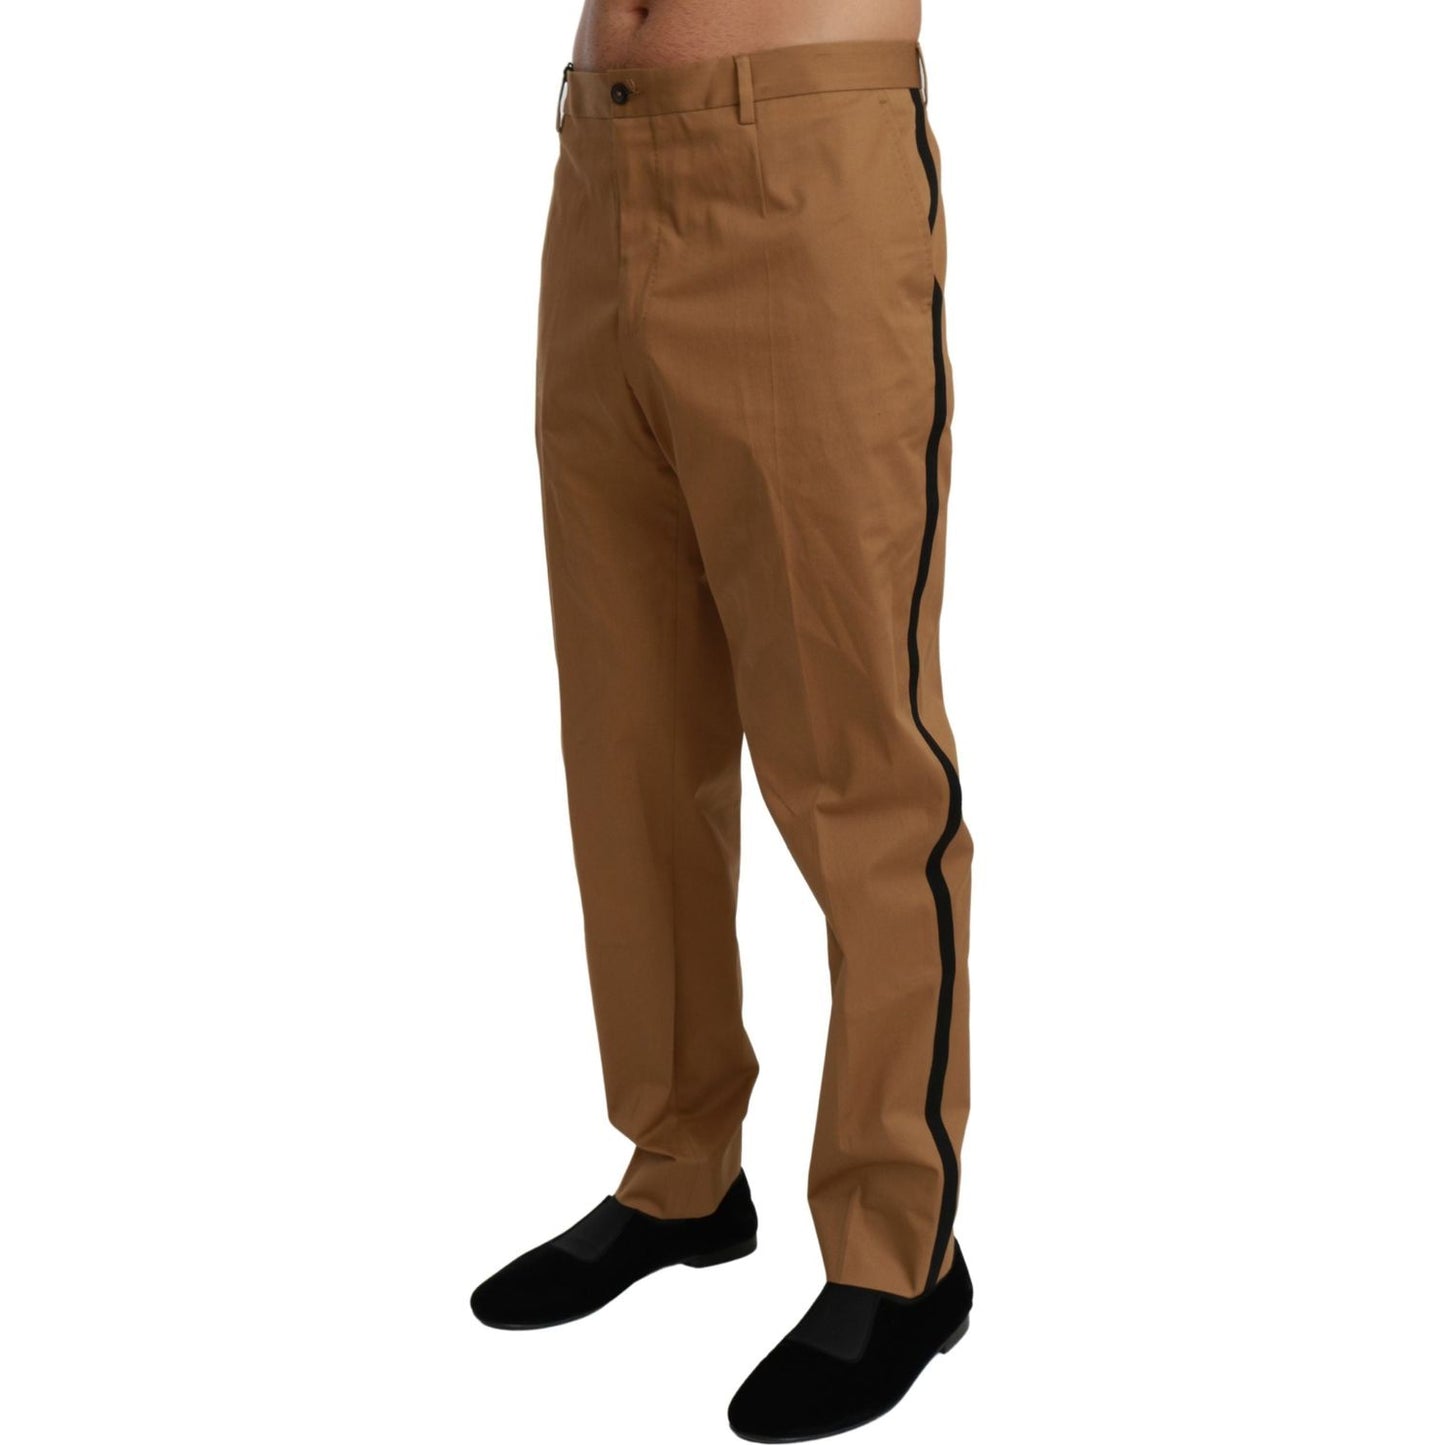 Dolce & Gabbana Elegant Slim Fit Brown Casual Pants brown-chinos-trousers-cotton-stretch-pants IMG_3314-scaled-92f038c2-5fb.jpg